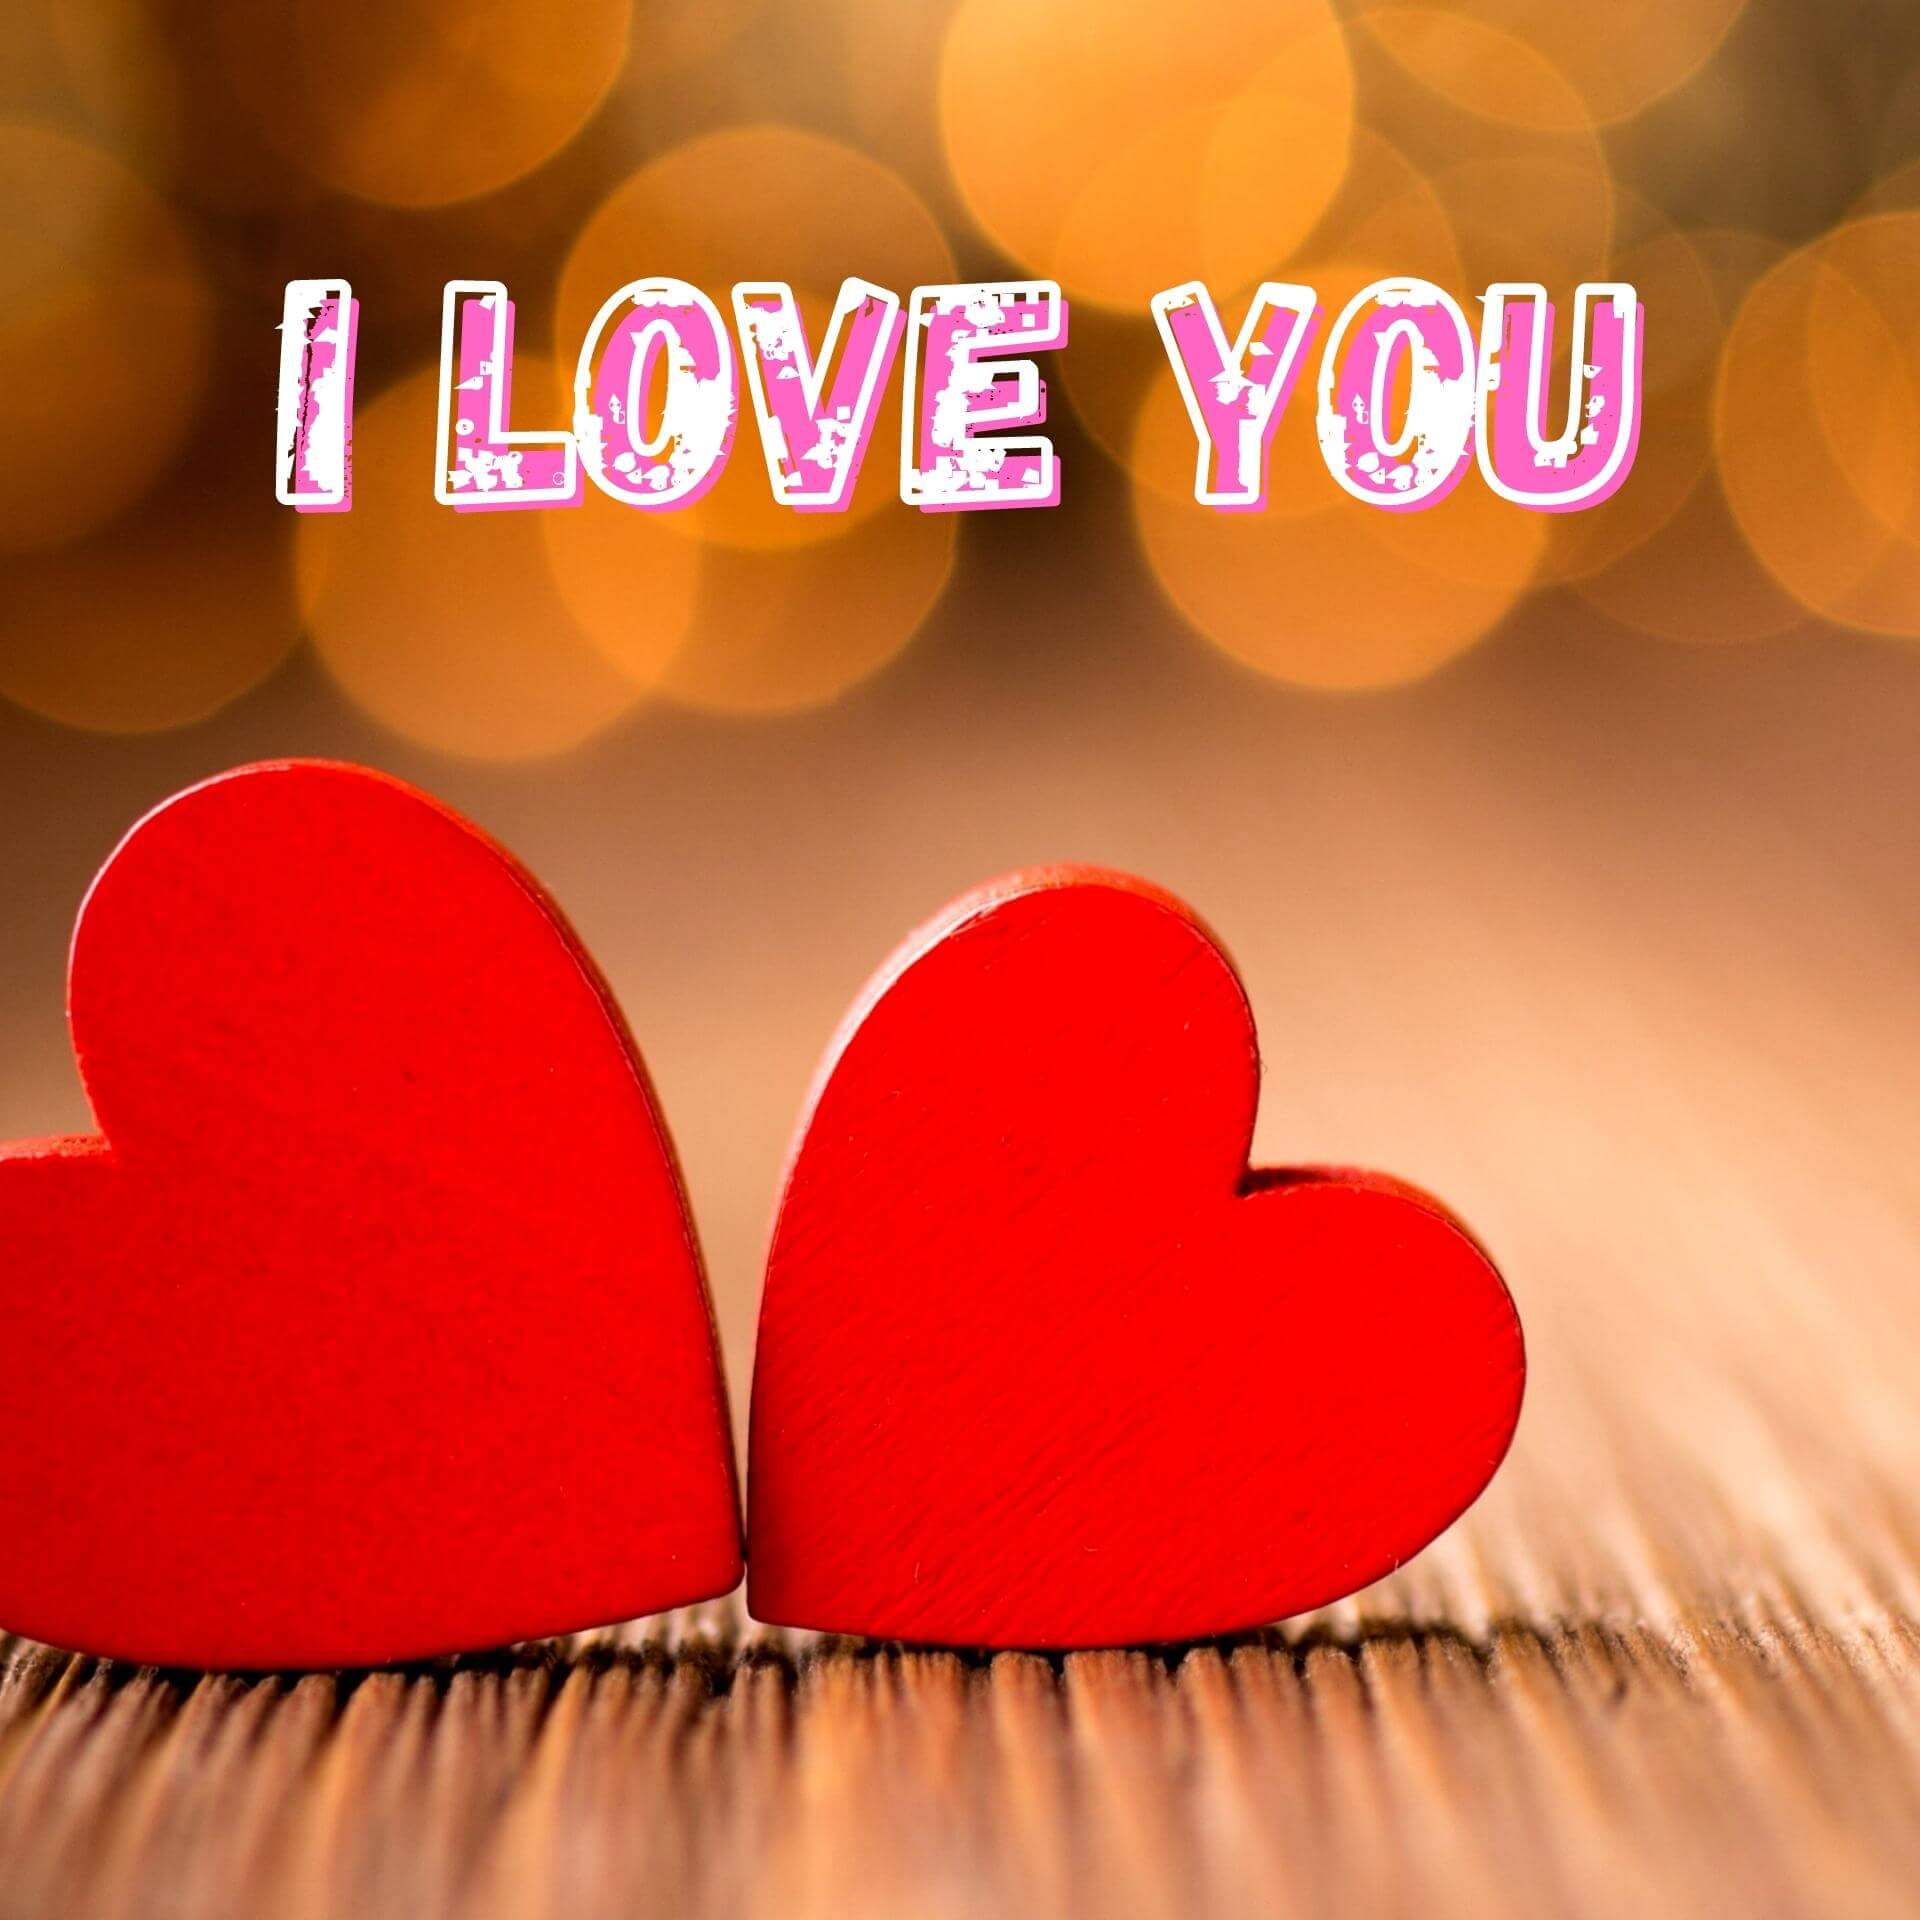 187+ I Love You Images Pictures For Whatsapp